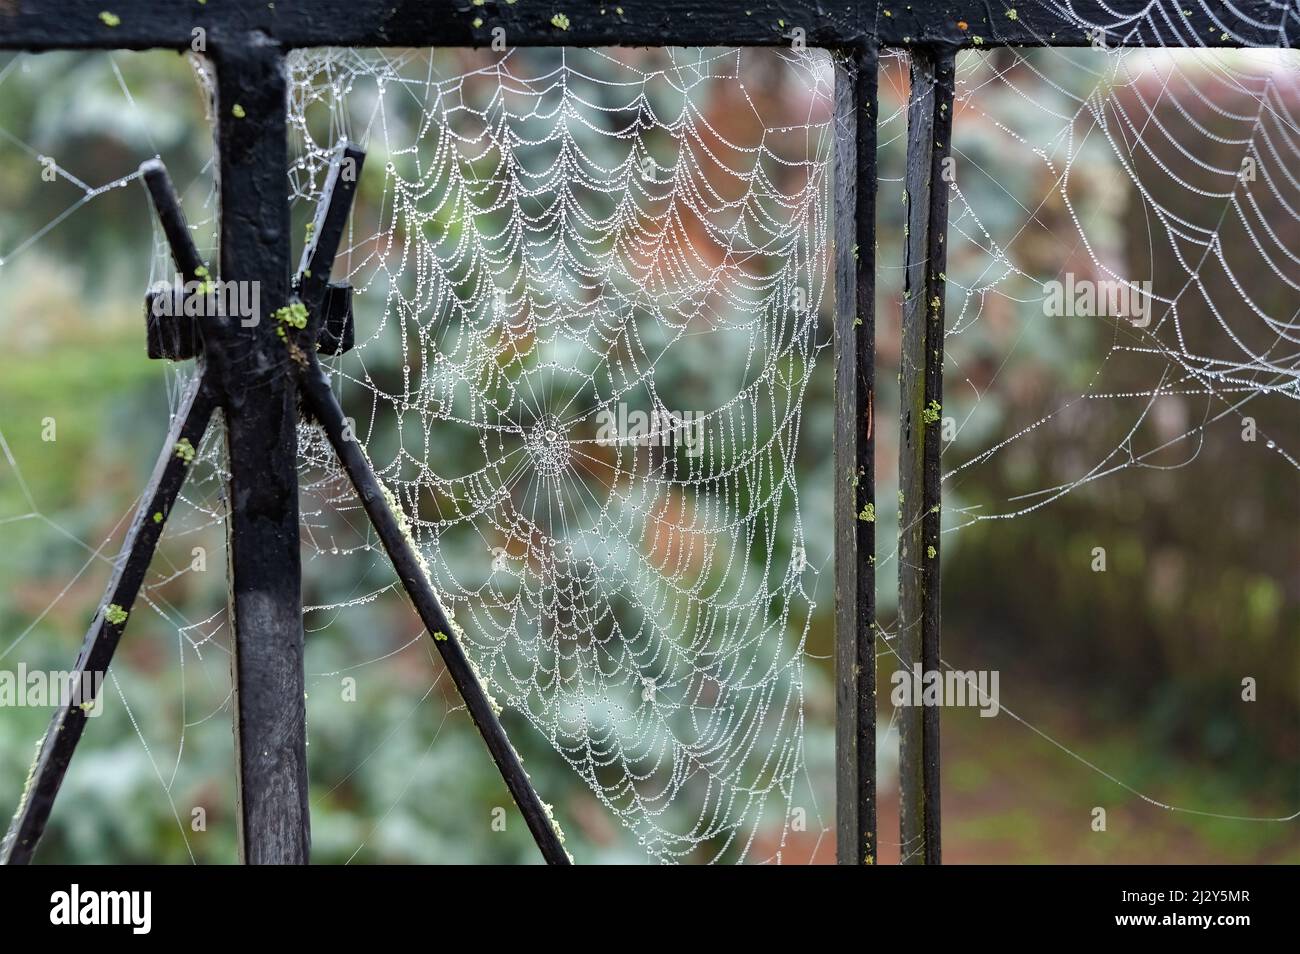 Beautiful water droplets cling onto a spider web, just like transparent beads curtain. Stock Photo